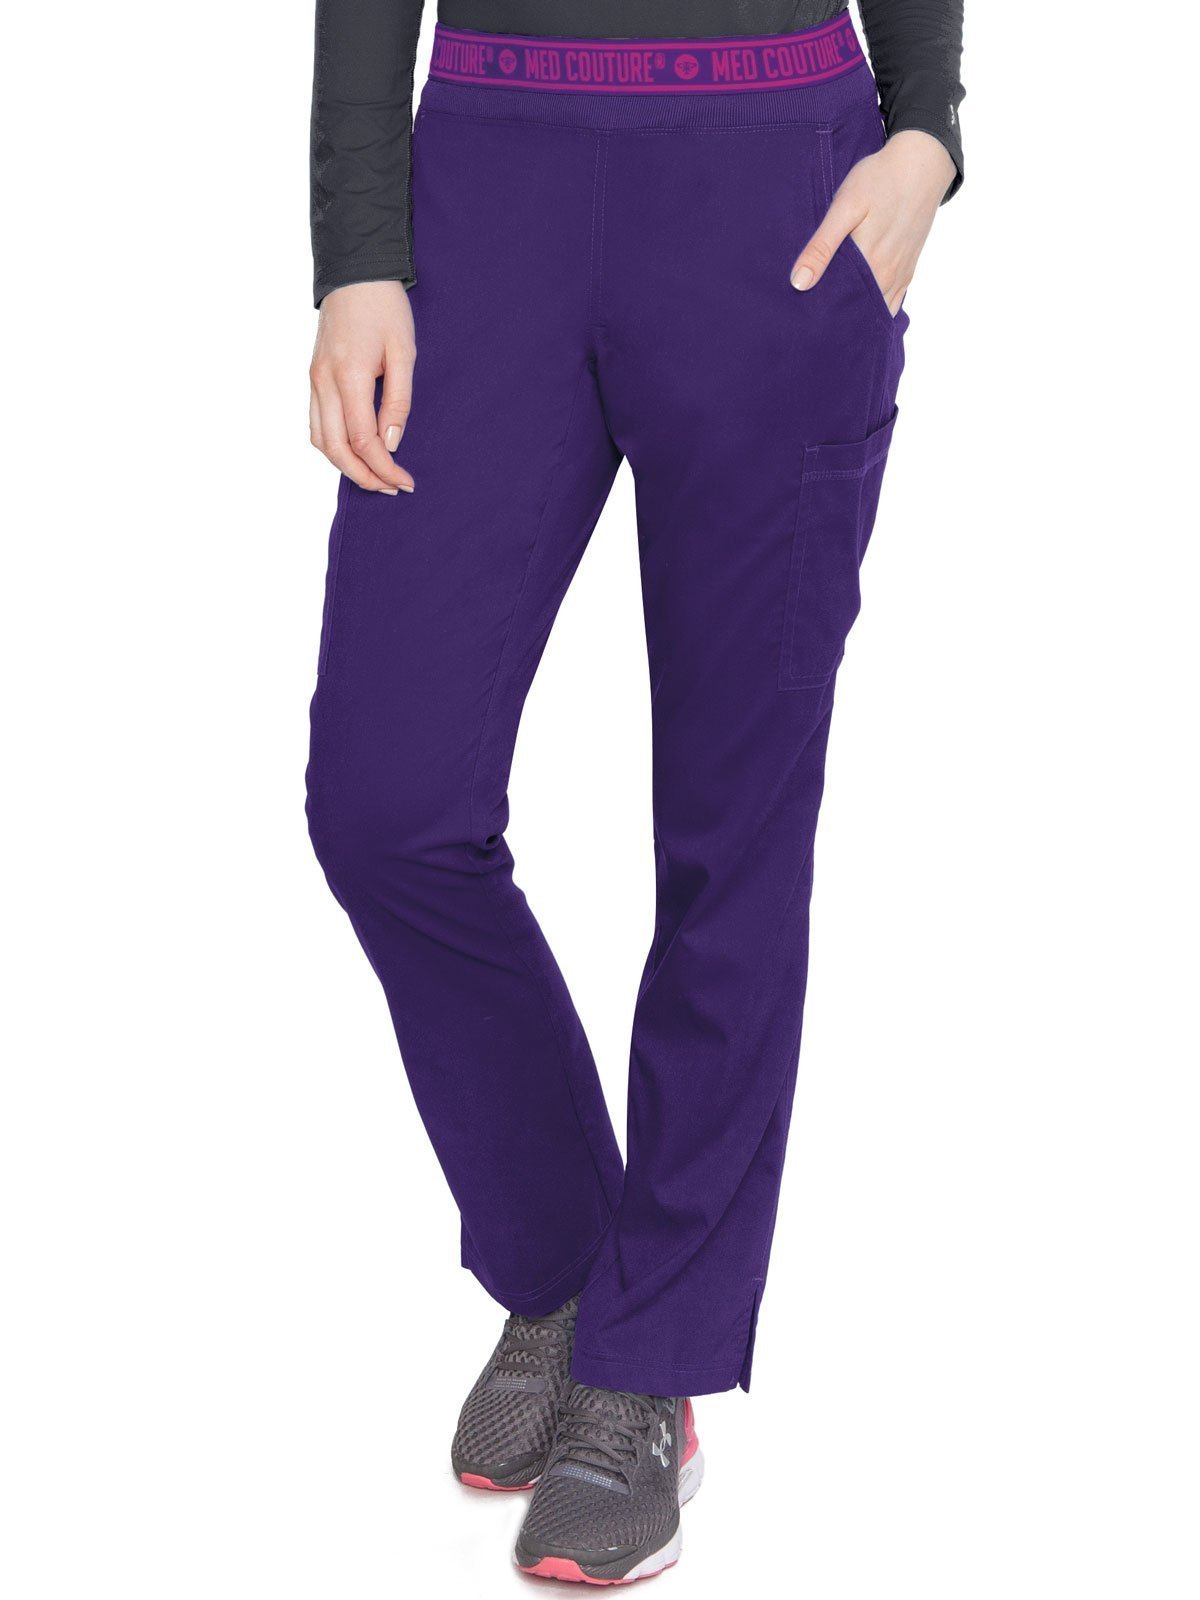 Med Couture Yoga Cargo Pant (P)